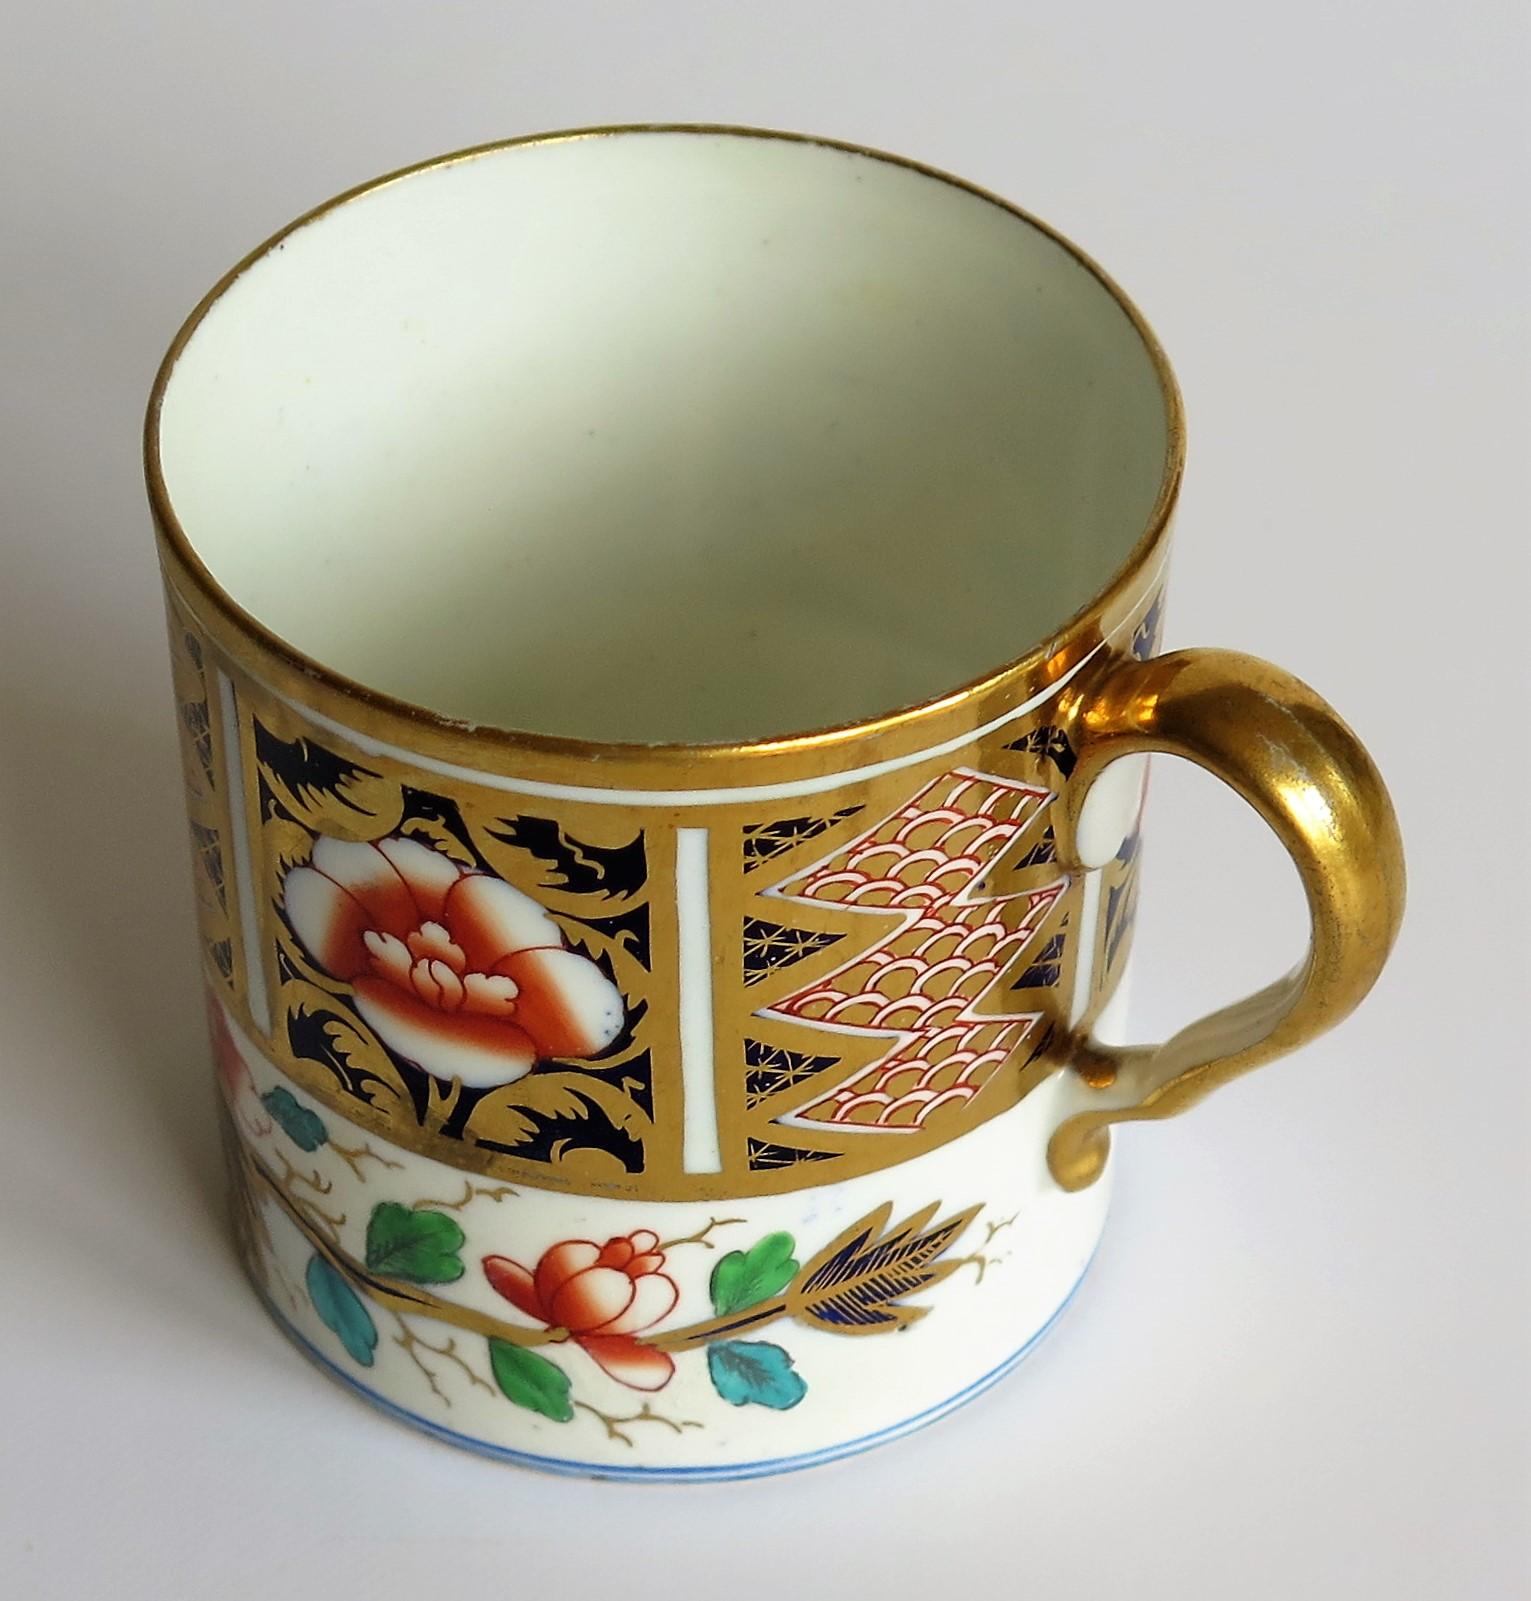 This is a fine example of an English George III period, SPODE porcelain, coffee can, hand painted in pattern 1250 and dating from the early 19th century, circa 1810.

The coffee can or cup is nominally straight sided and has the Spode loop handle